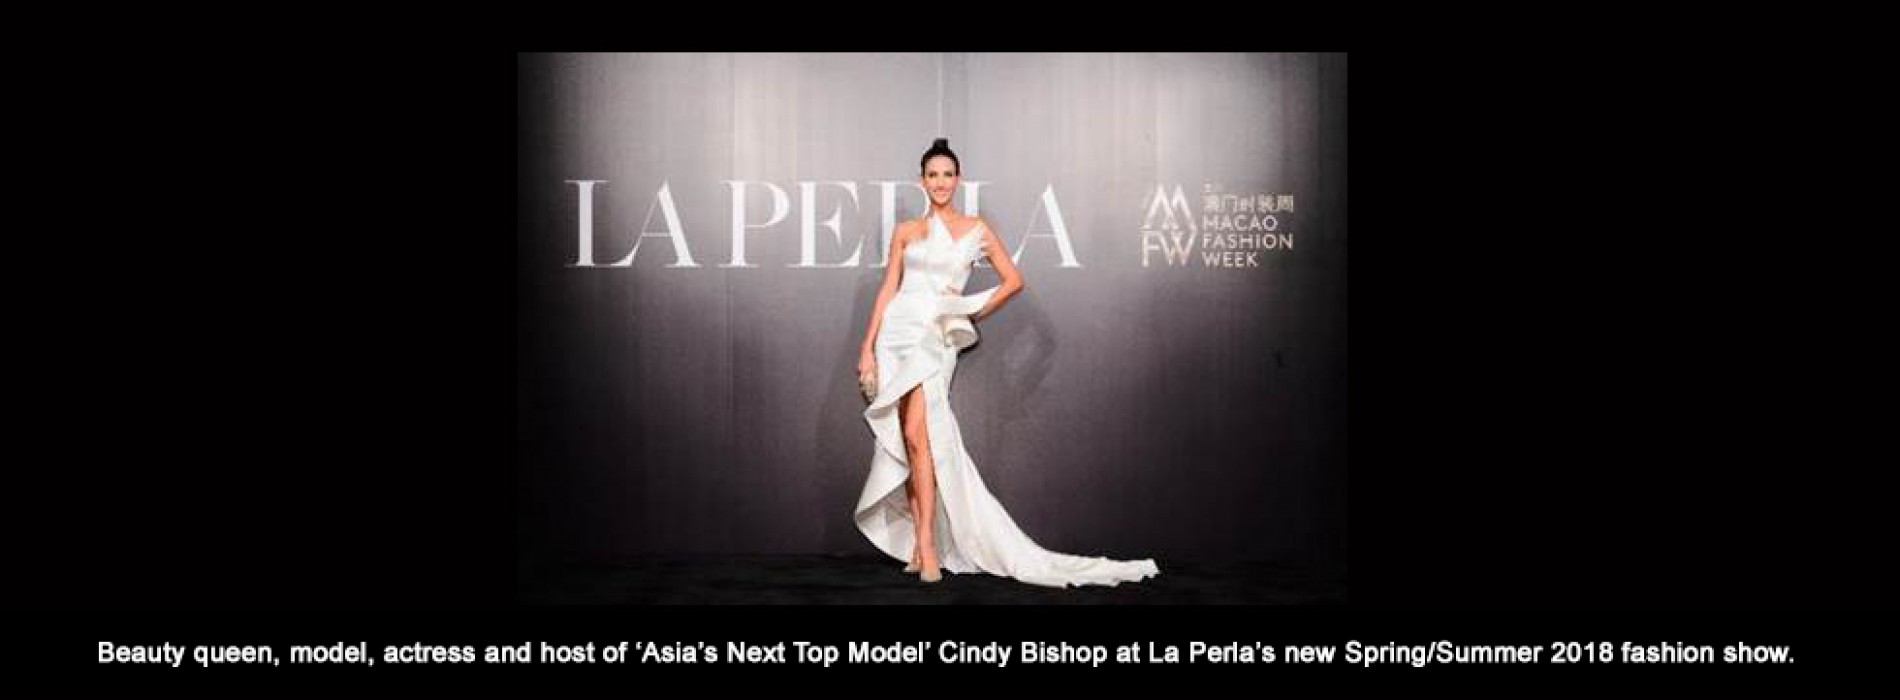 La Perla launches new SS18 collection at Exclusive Gala Dinner for inaugural Sands Macao Fashion Week